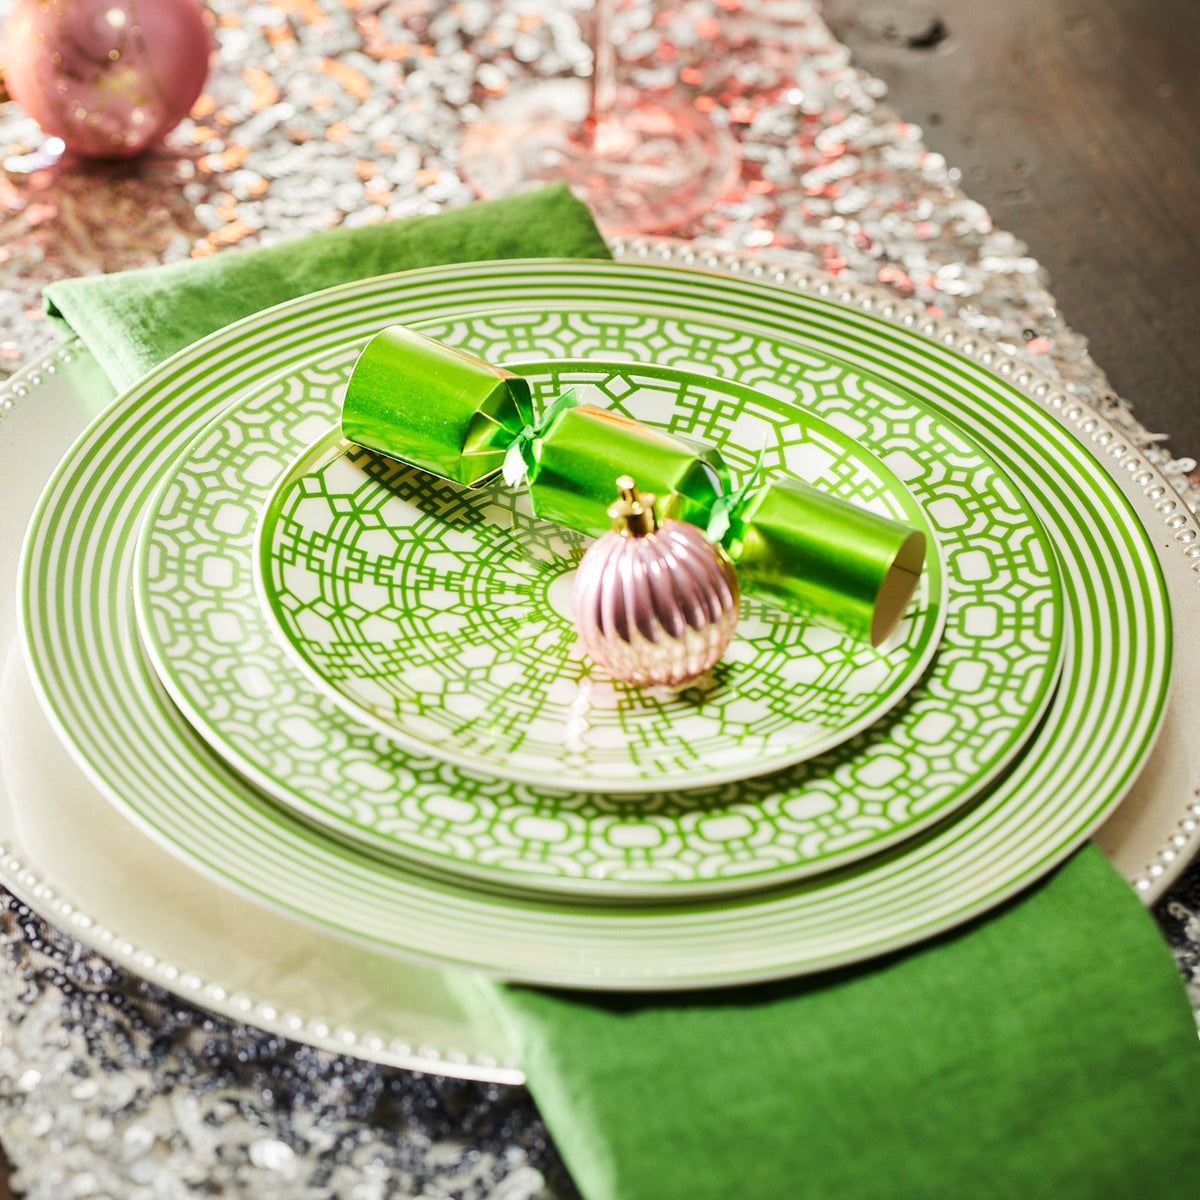 Newport Verde Small Plates by Caskata Artisanal Home, crafted from premium porcelain, with a green napkin, green cracker, and pink ornament set on a textured silver tablecloth.